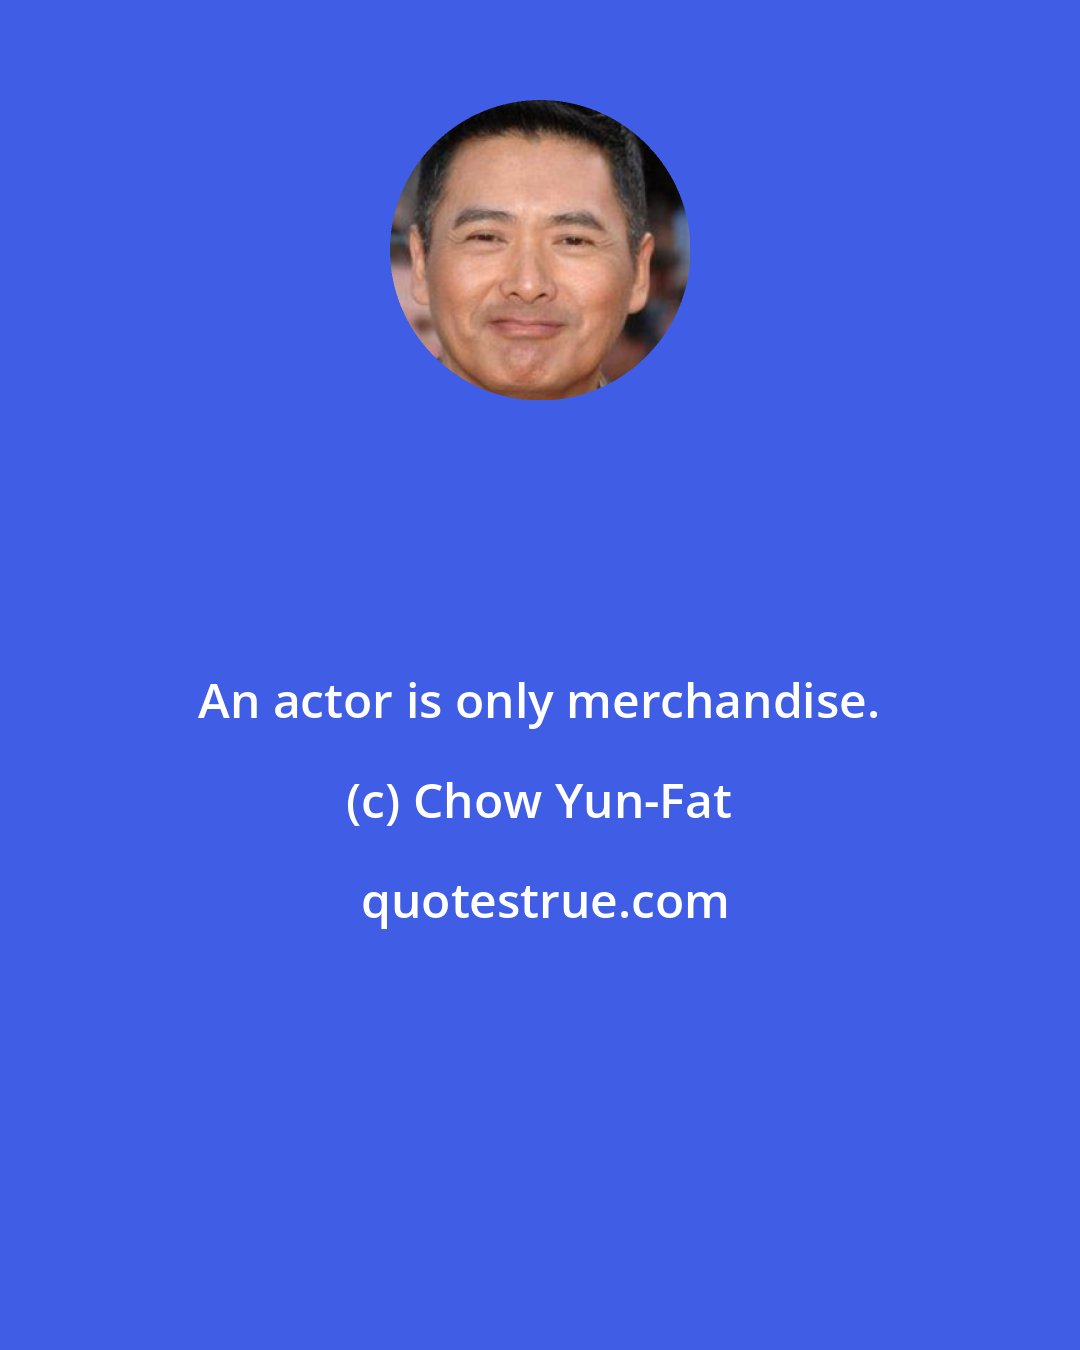 Chow Yun-Fat: An actor is only merchandise.